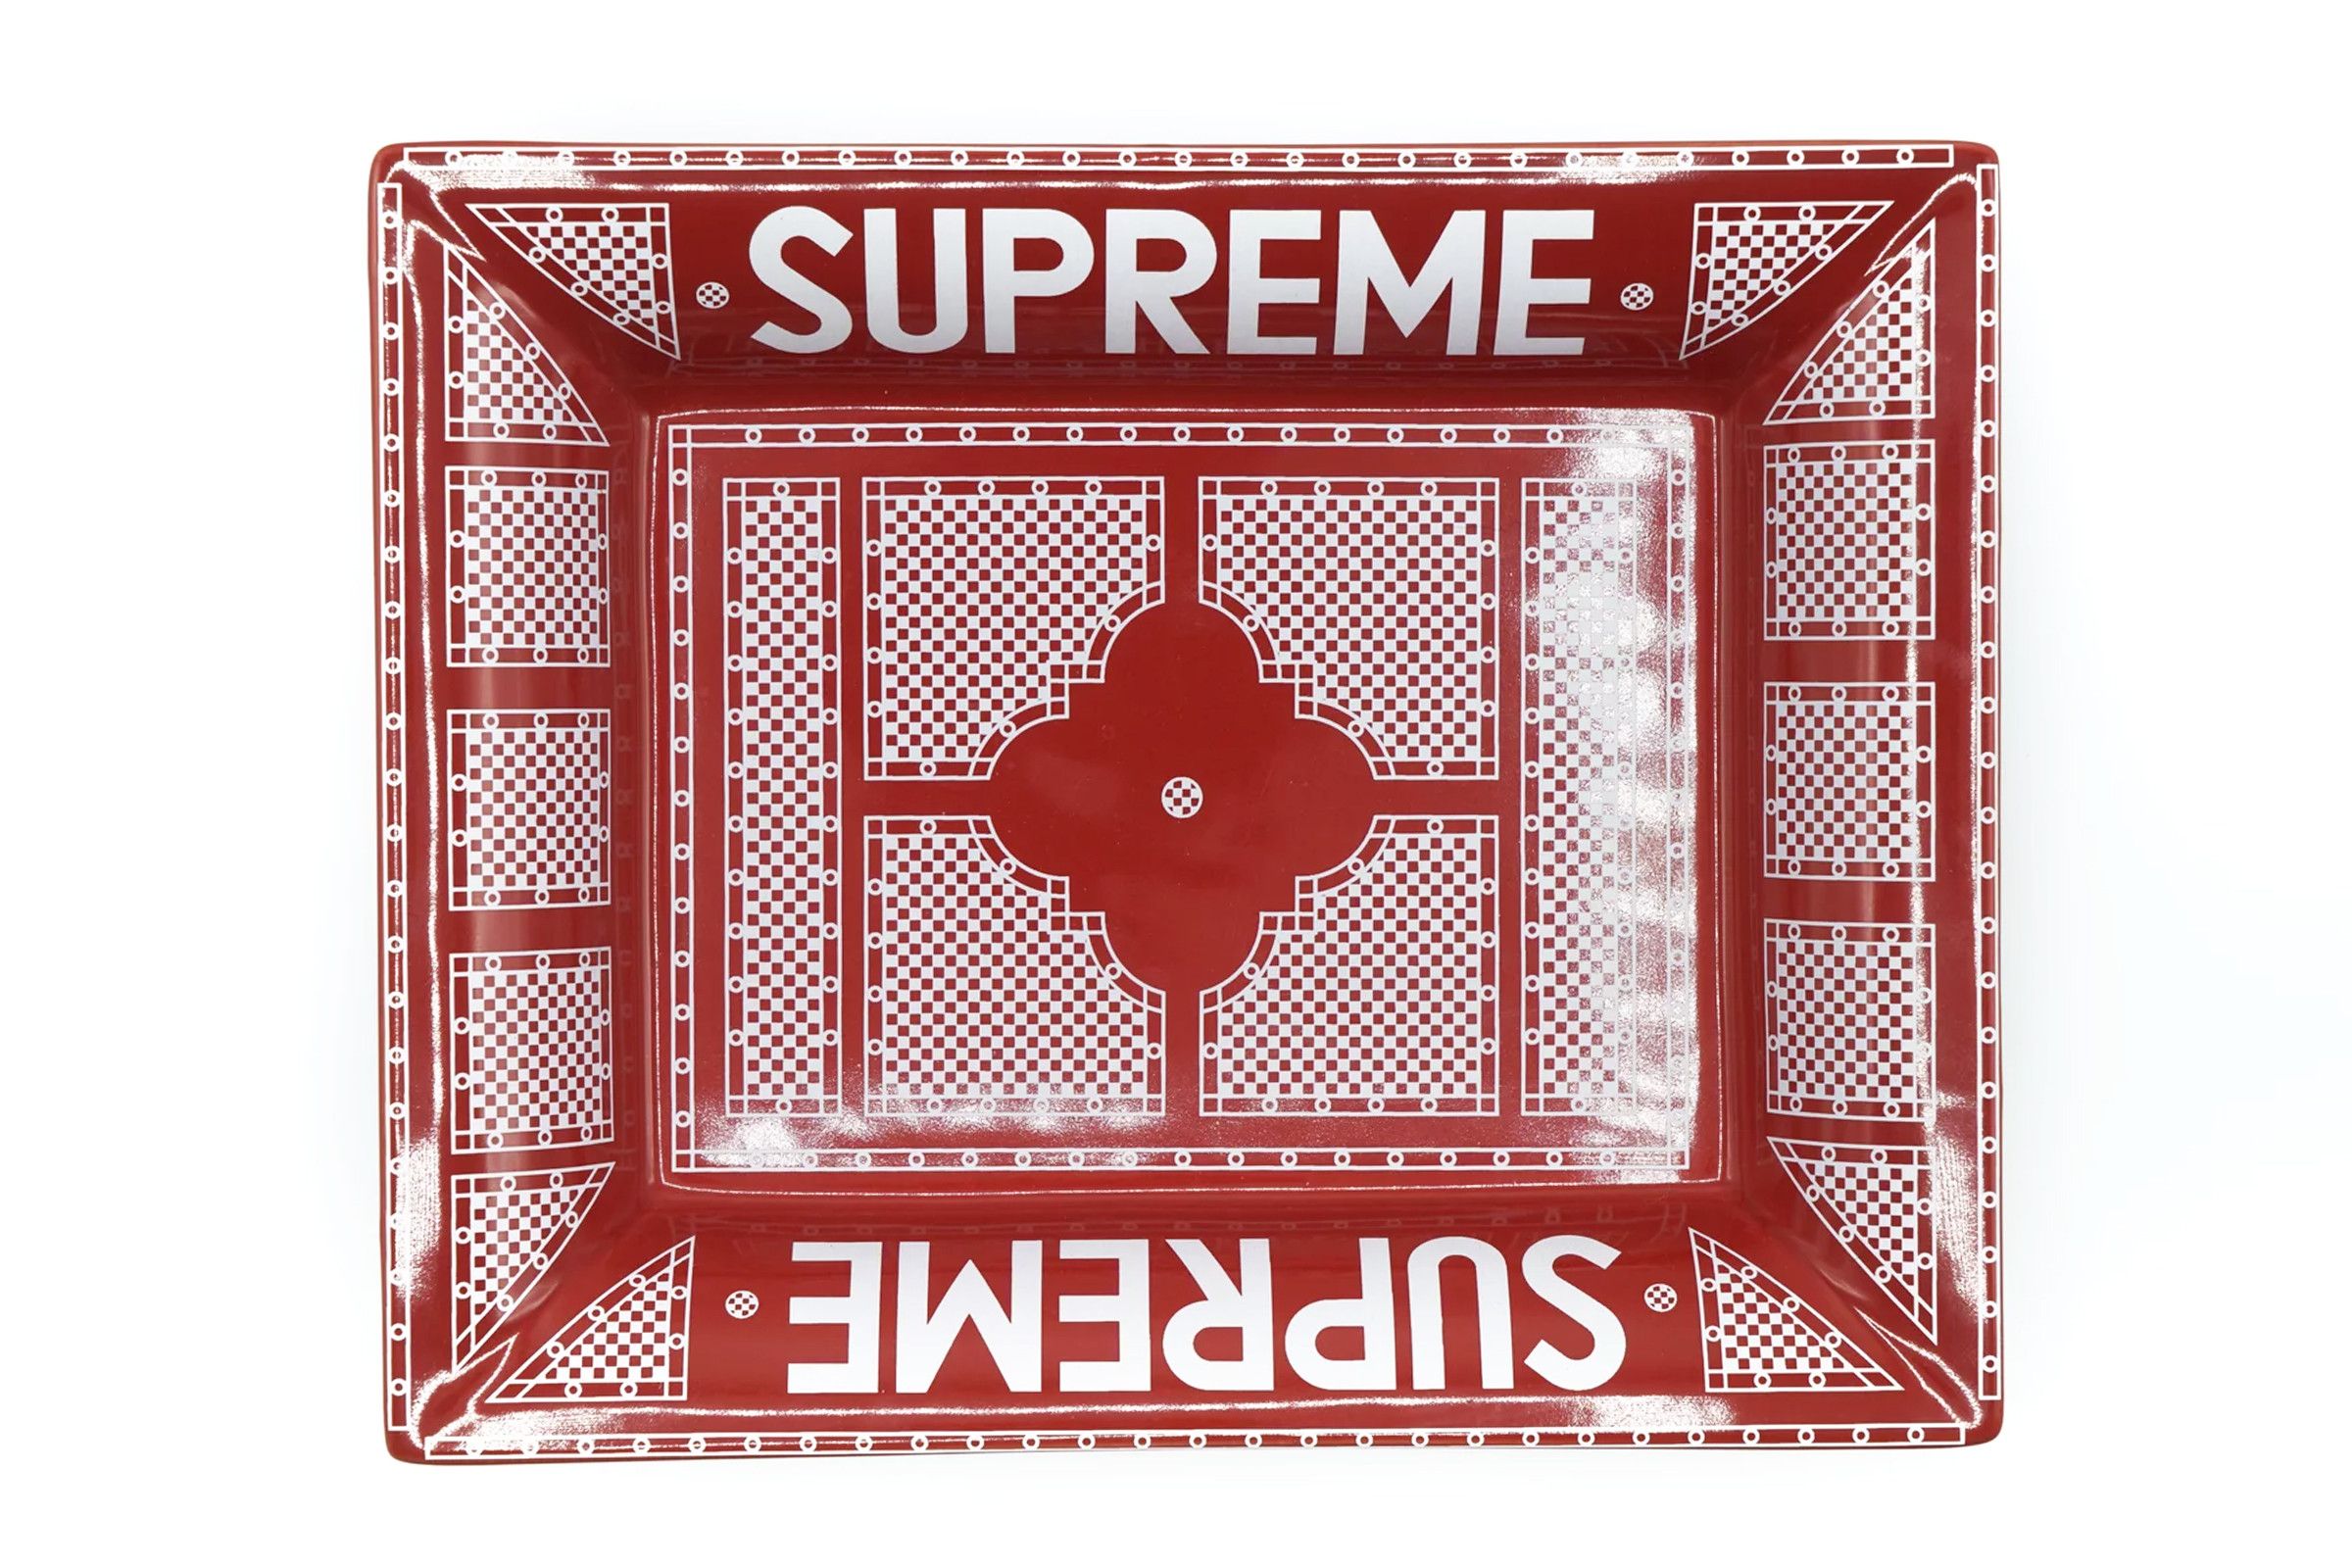 Supreme Knowledge Part 1! The Supreme $100 paperweight! Can you